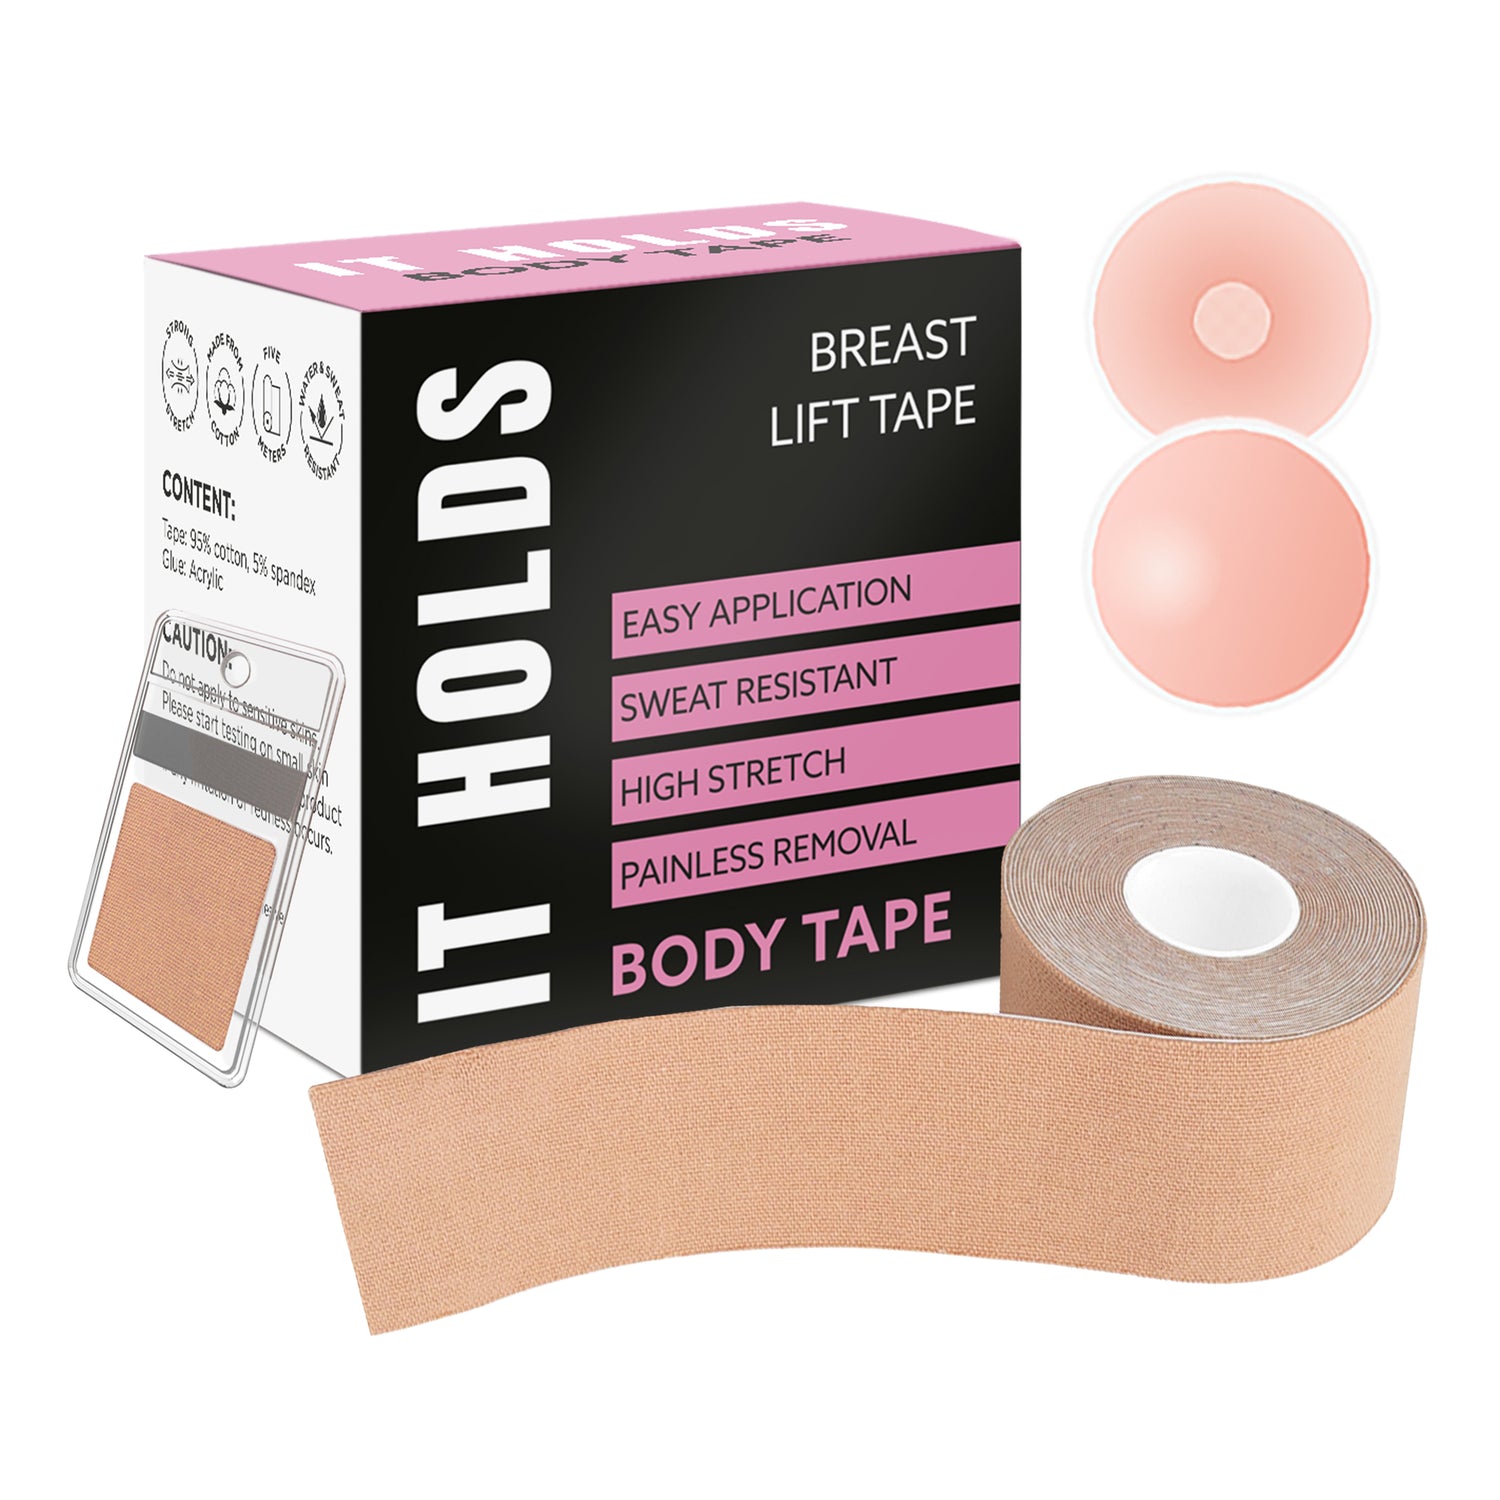 Best Breast Lift Tape for Larger Breast with Good Quality - China